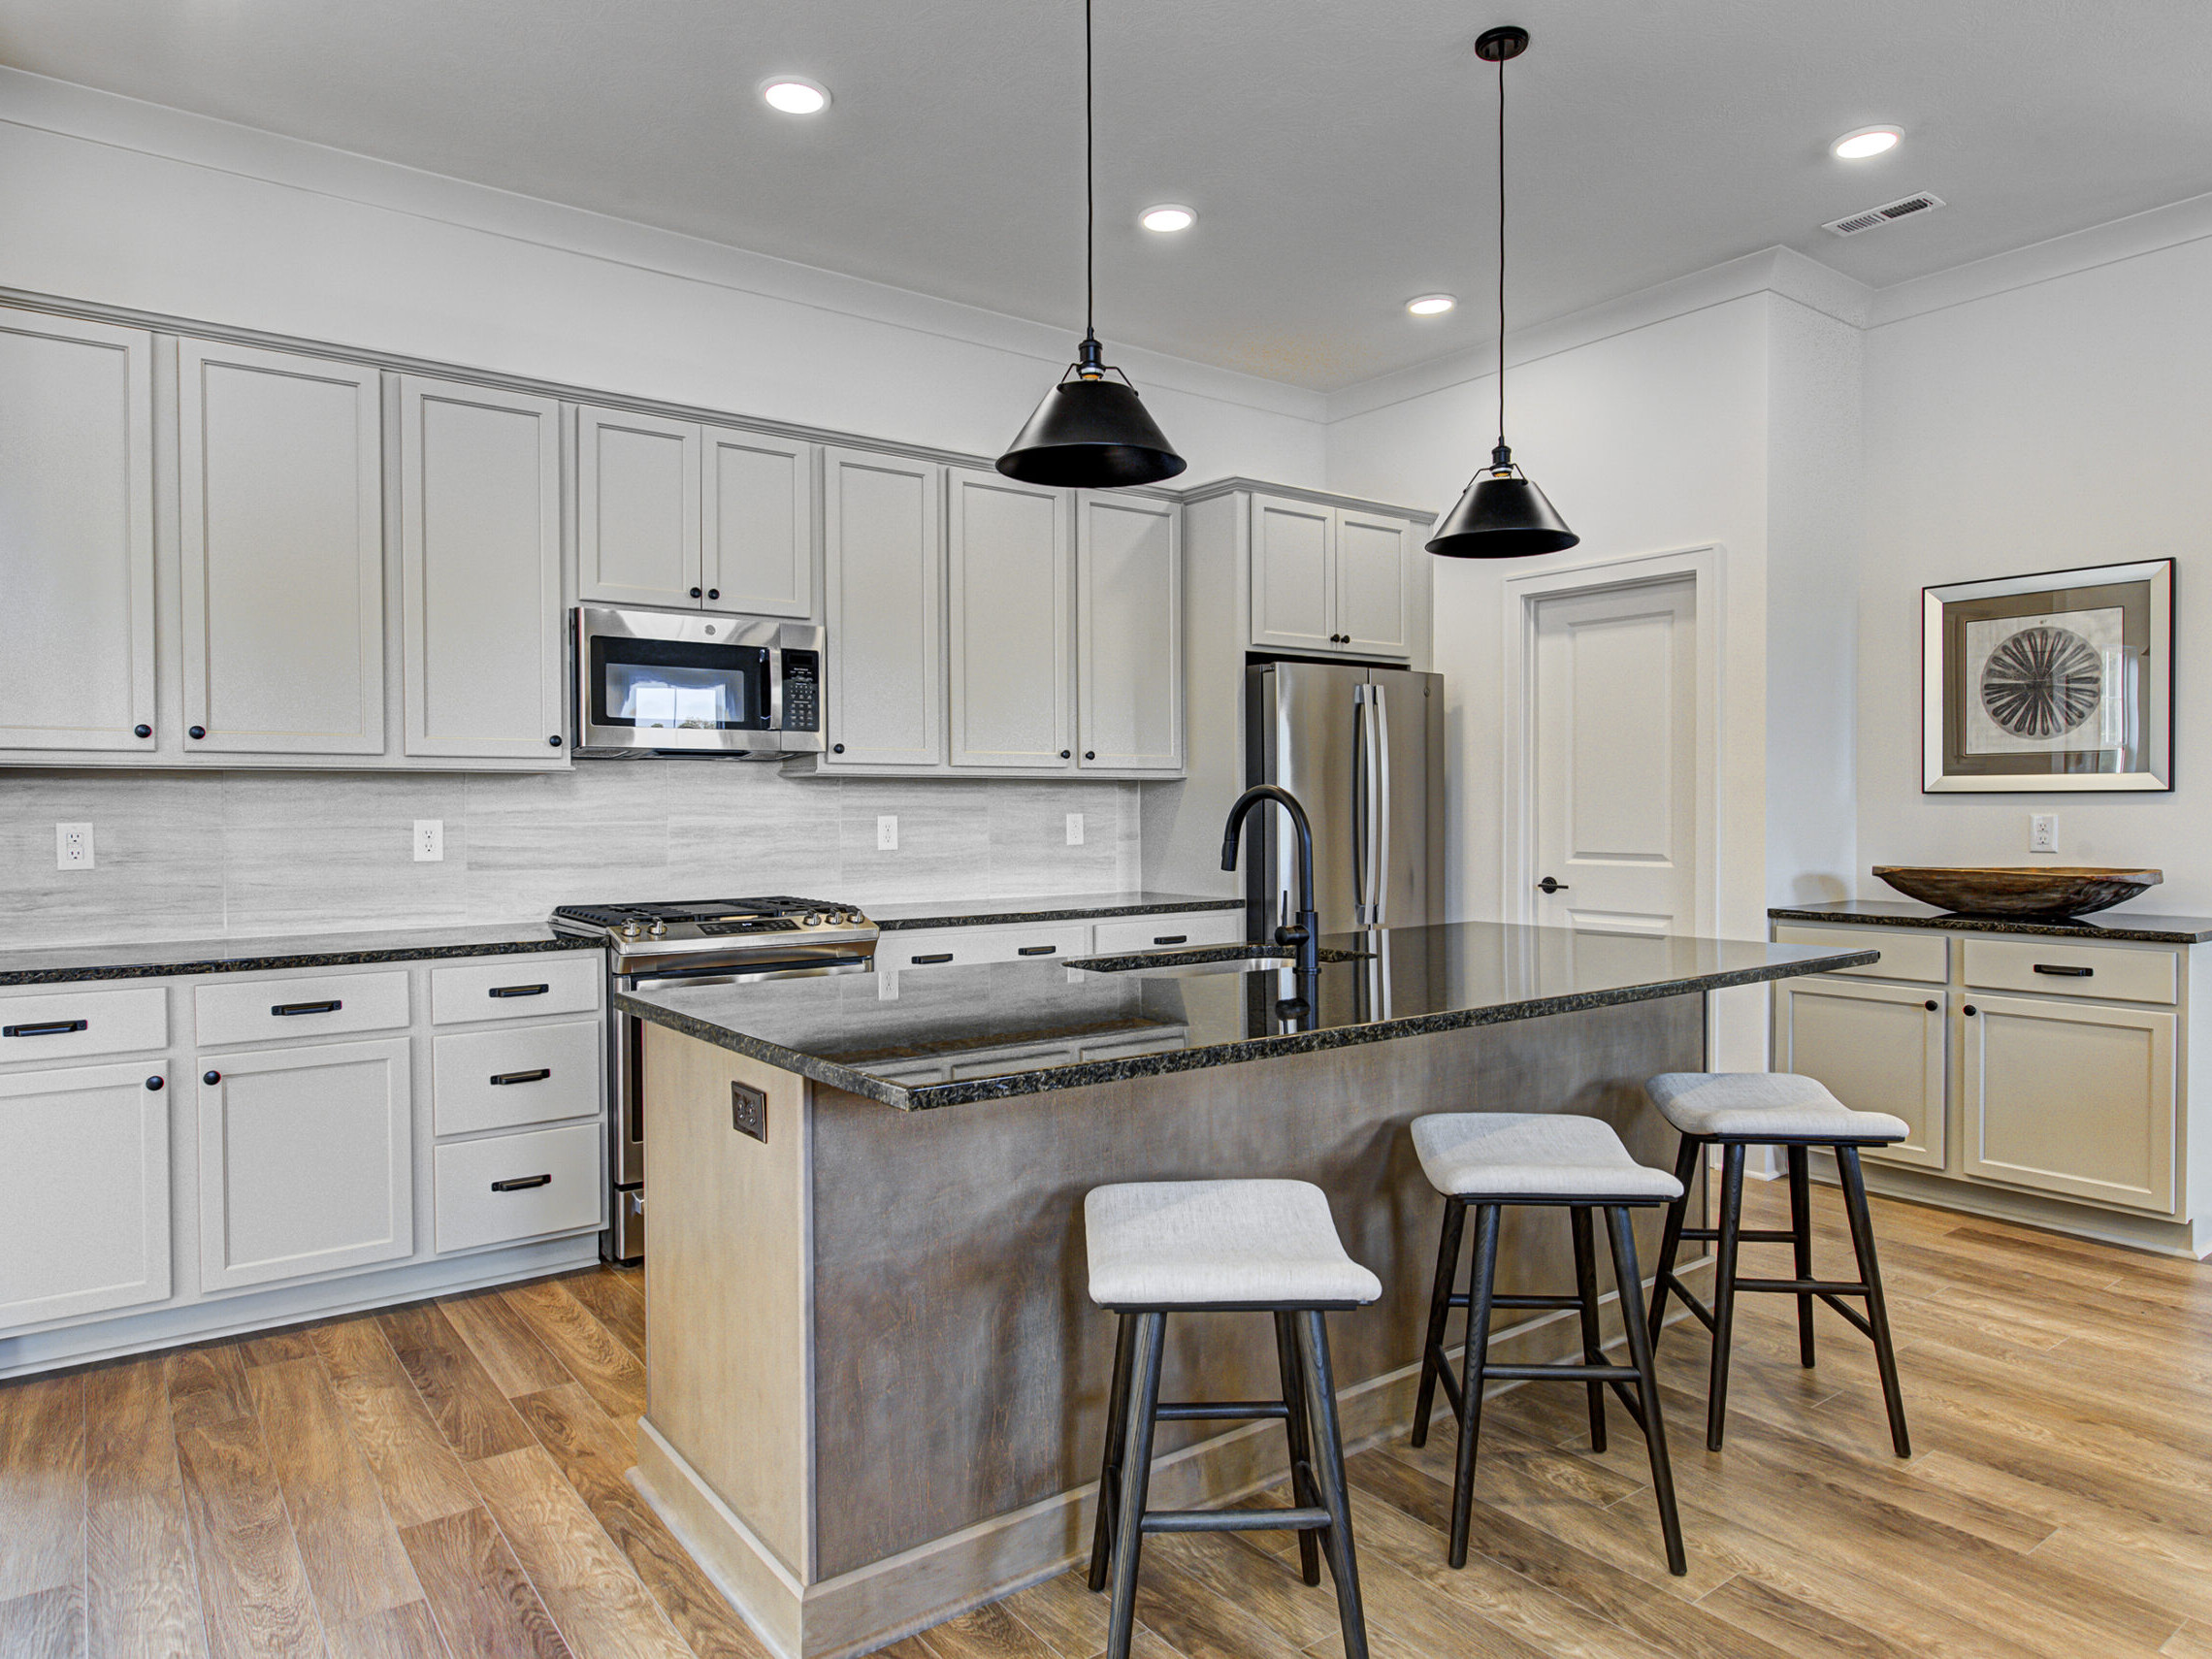 A kitchen with a center island and stools designed by a custom home builder in Carmel Indiana.